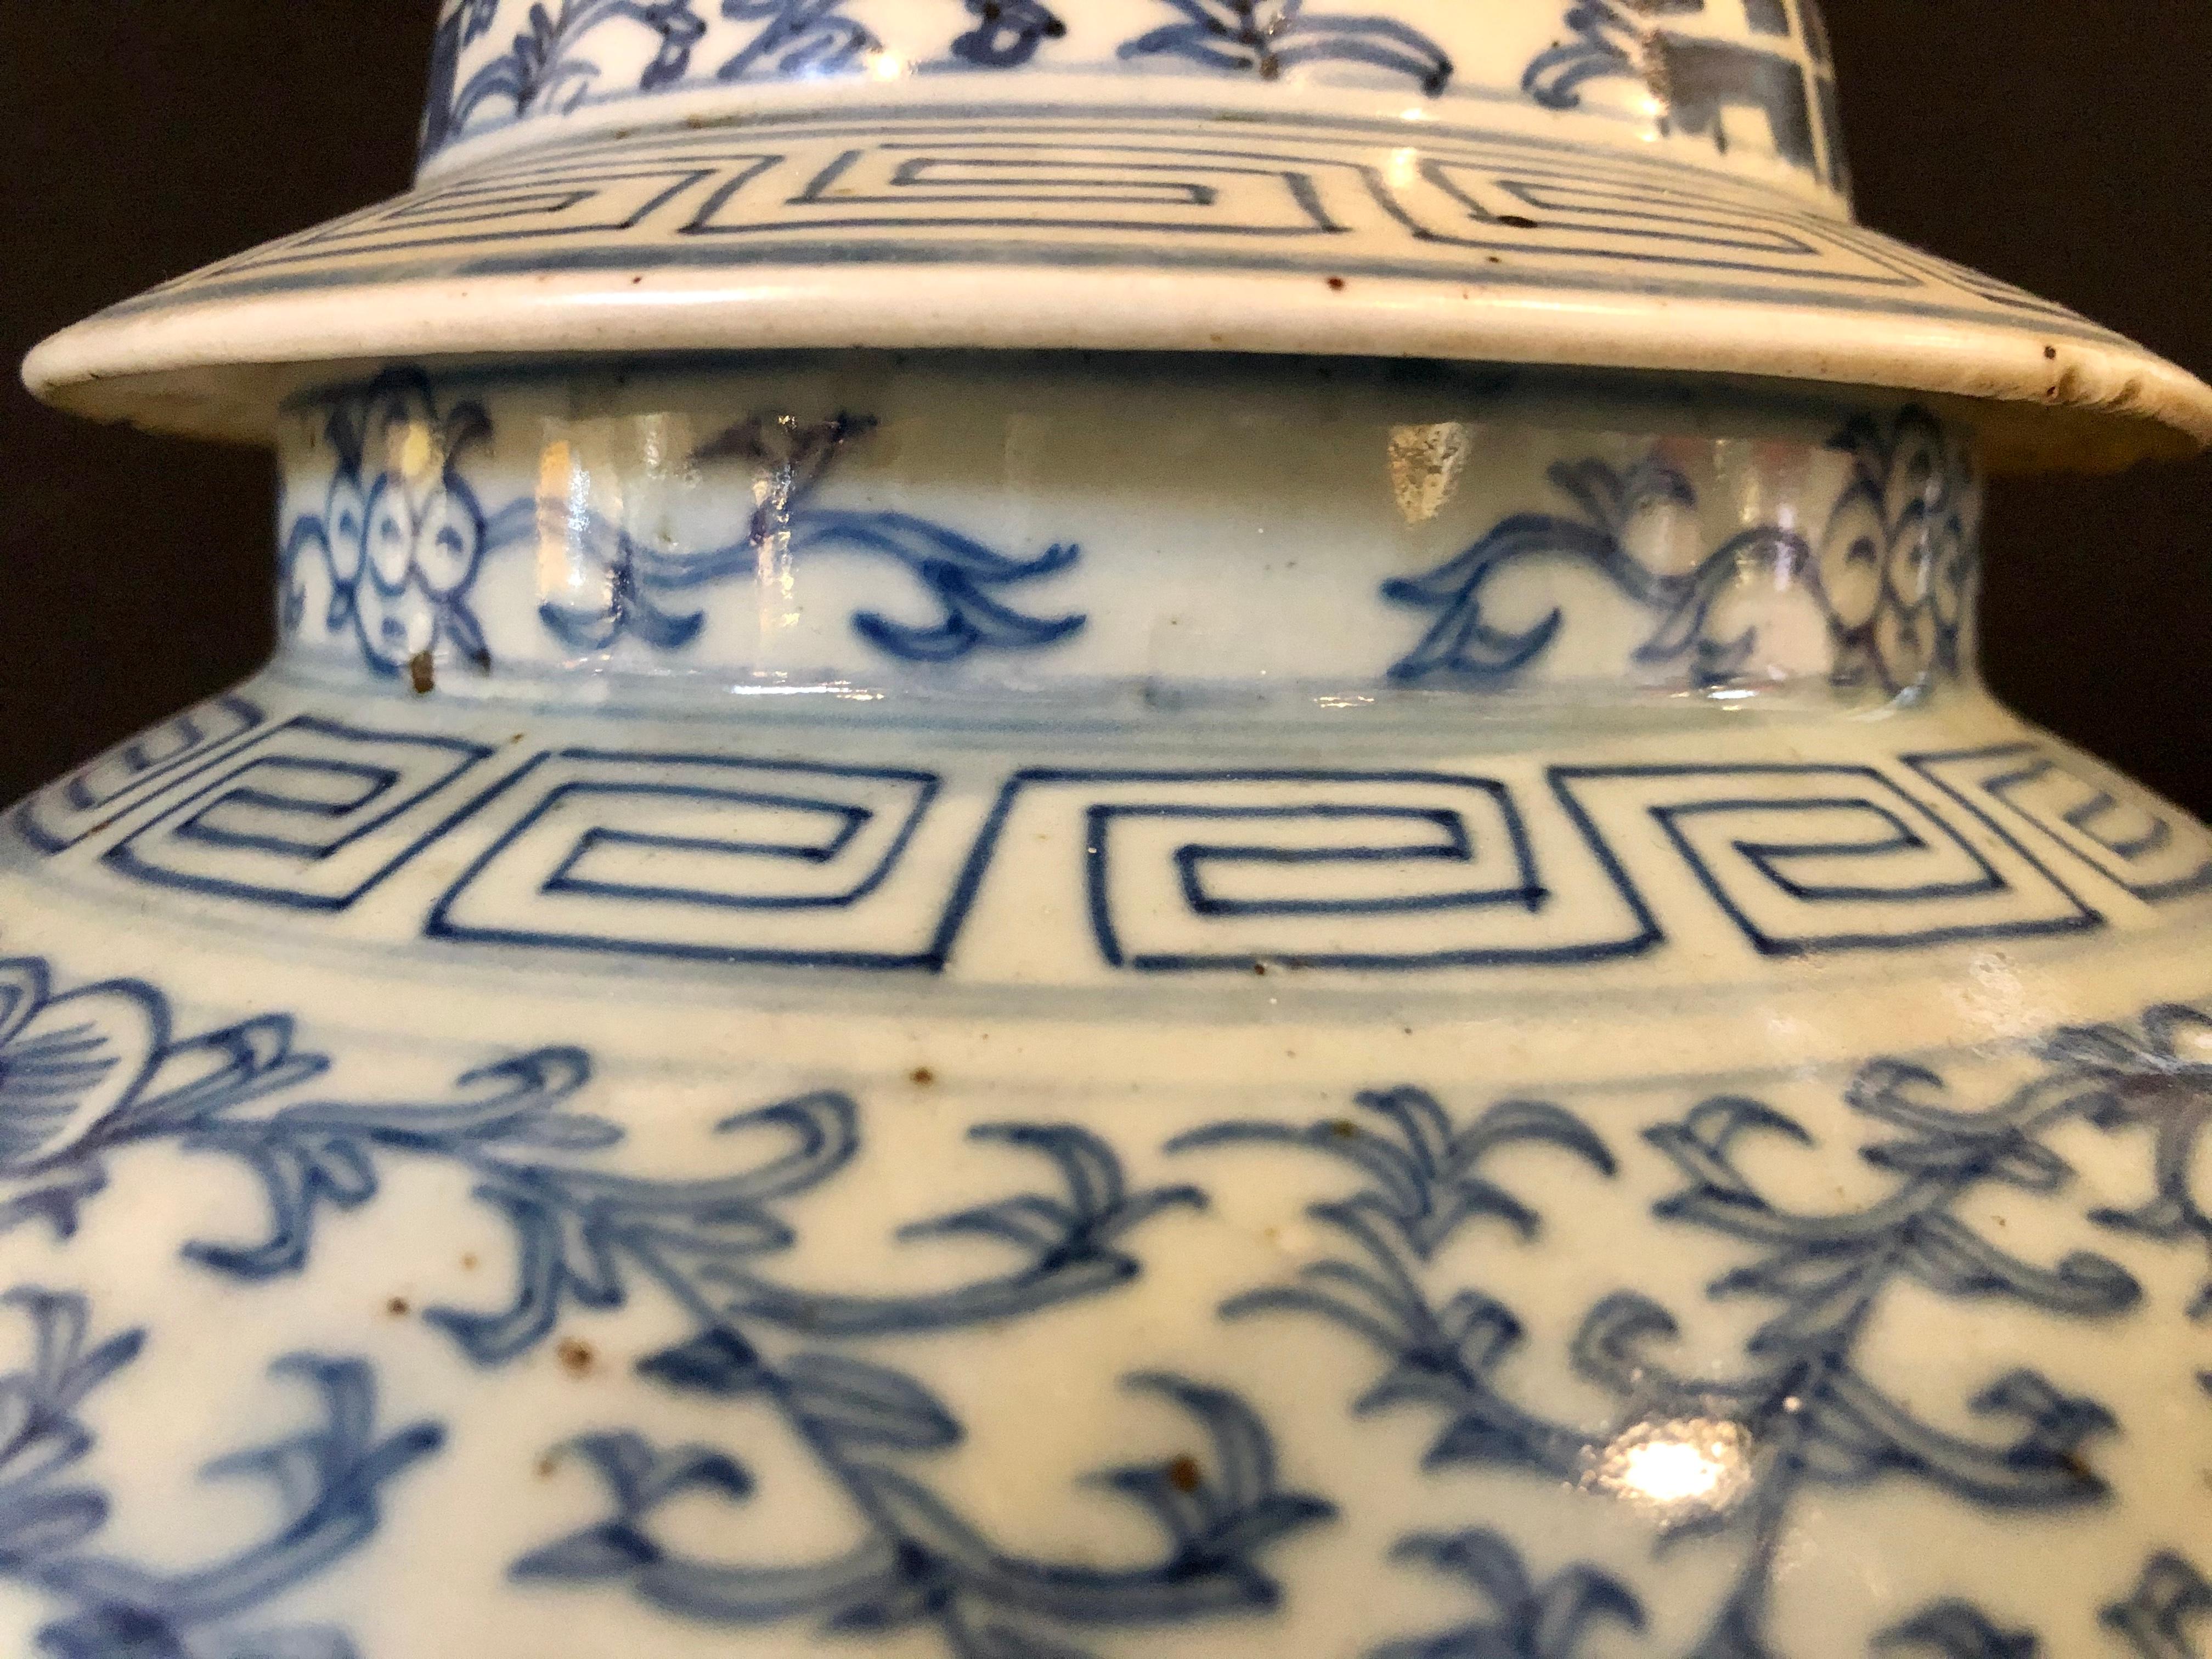 Chinese Export Blue and White Chinese Lidded Ginger Jar, Vase or Urn, Signed on Bottom For Sale